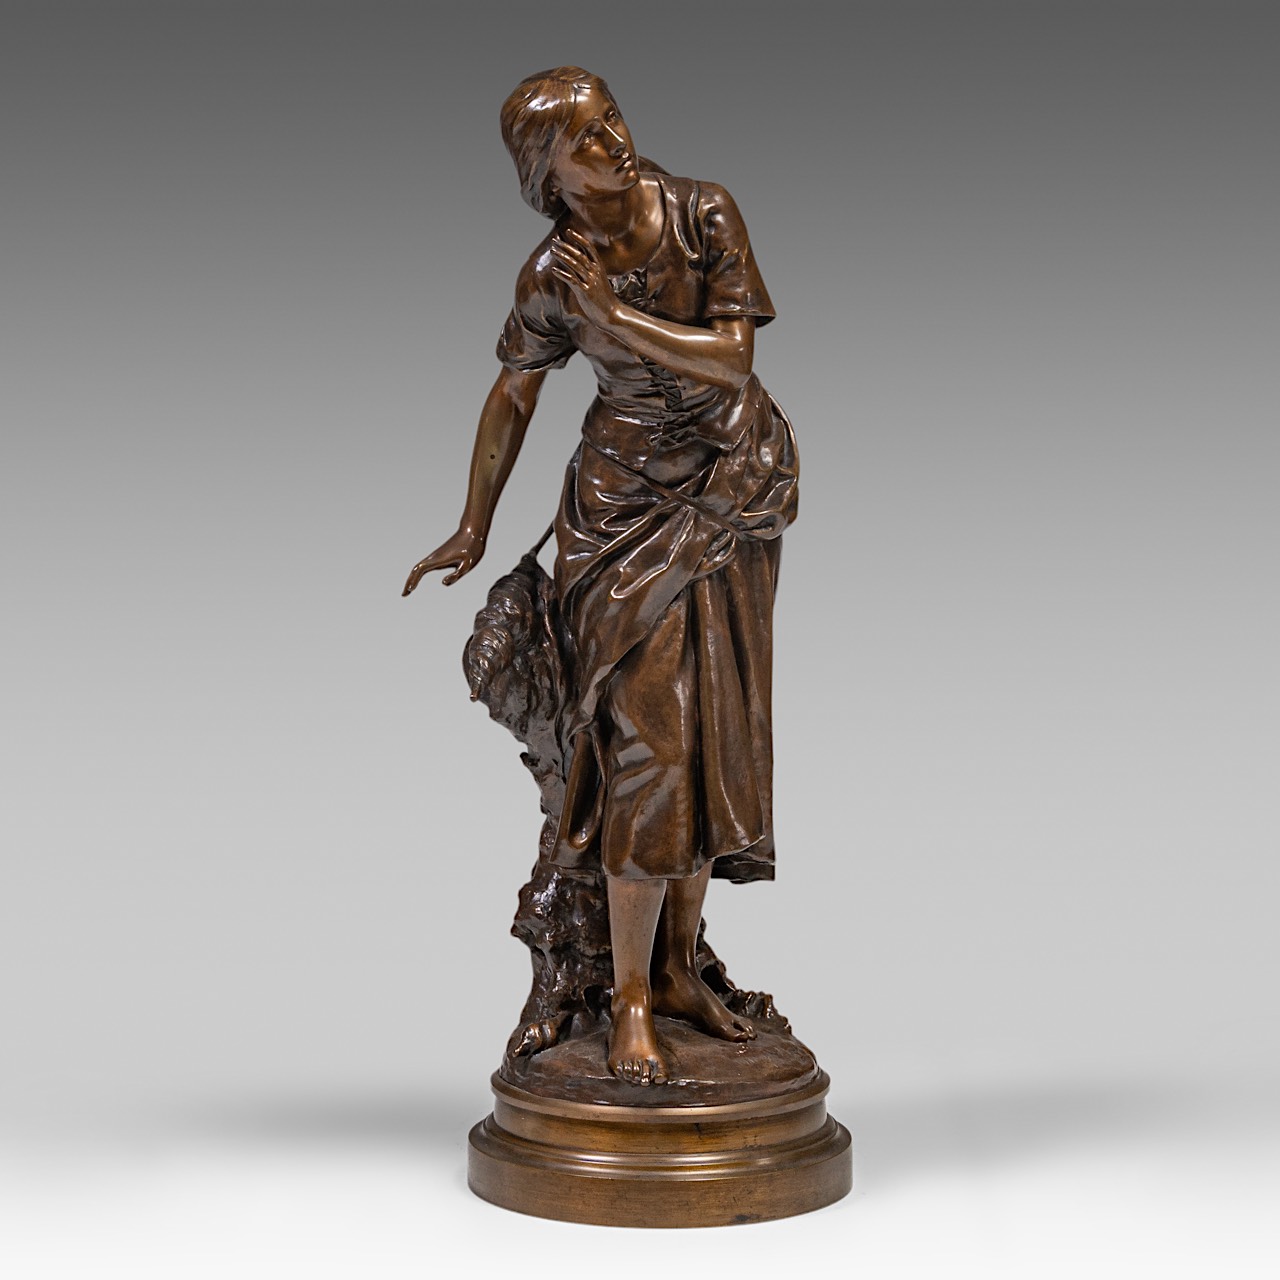 Mathurin Moreau (1822-1912), the spinner, patinated bronze, Hors Concours, H 89 cm